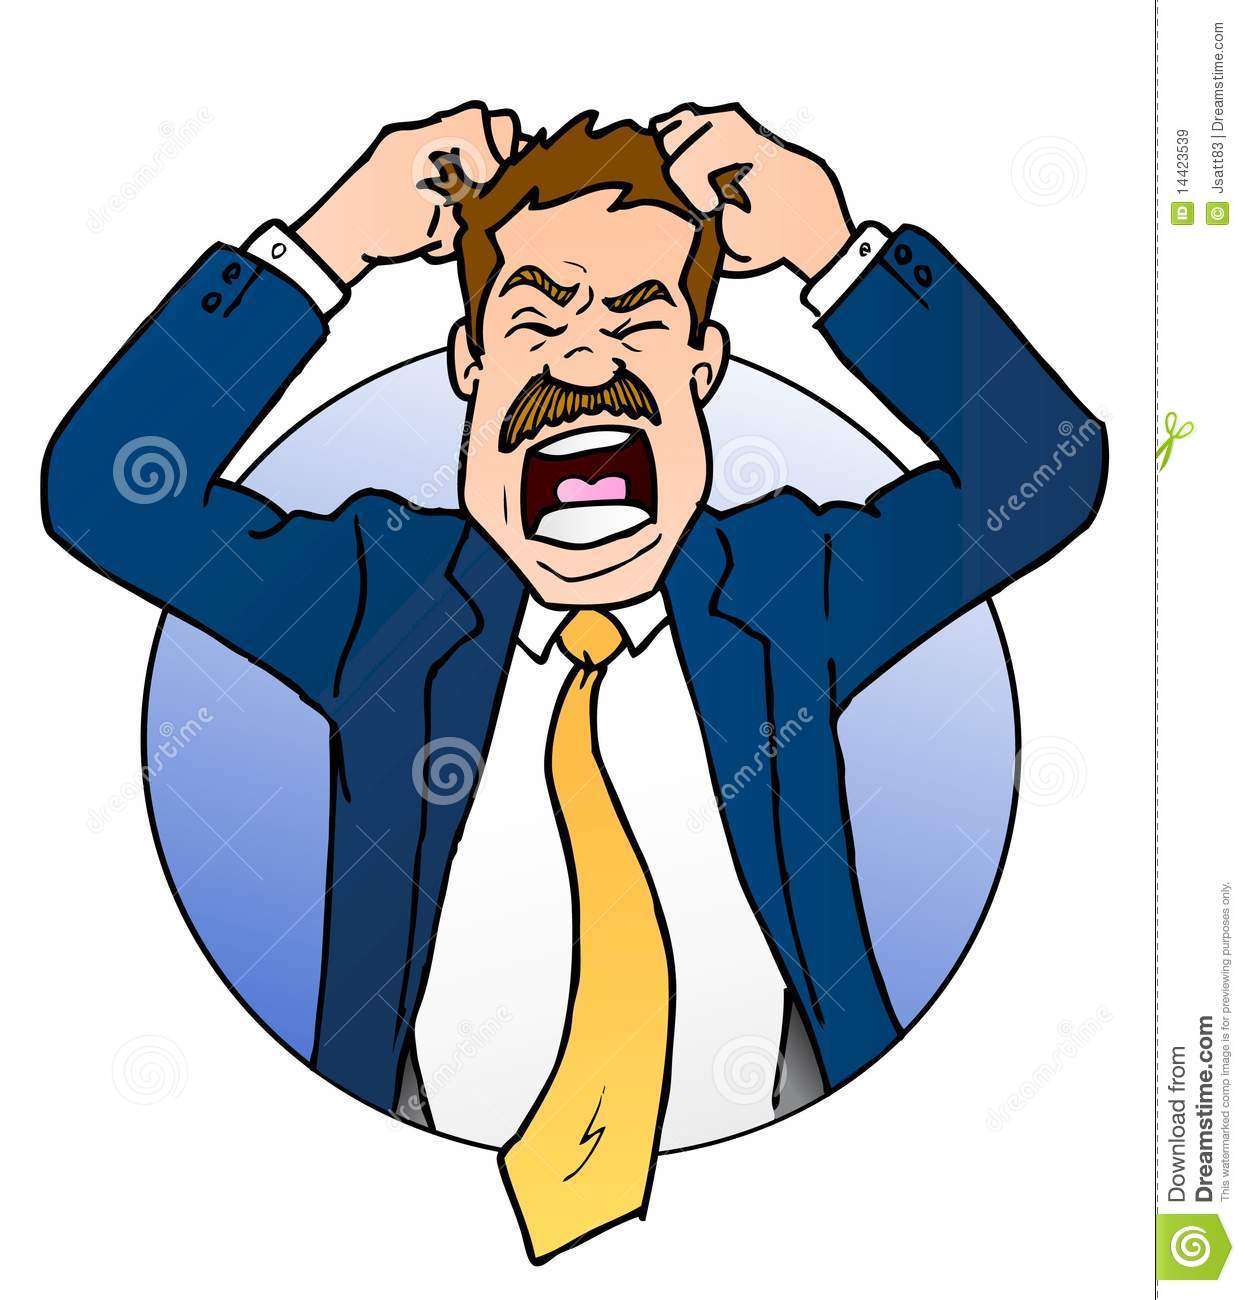 This Is A Cartoon Illustration Of A Very Frustrated Business Man